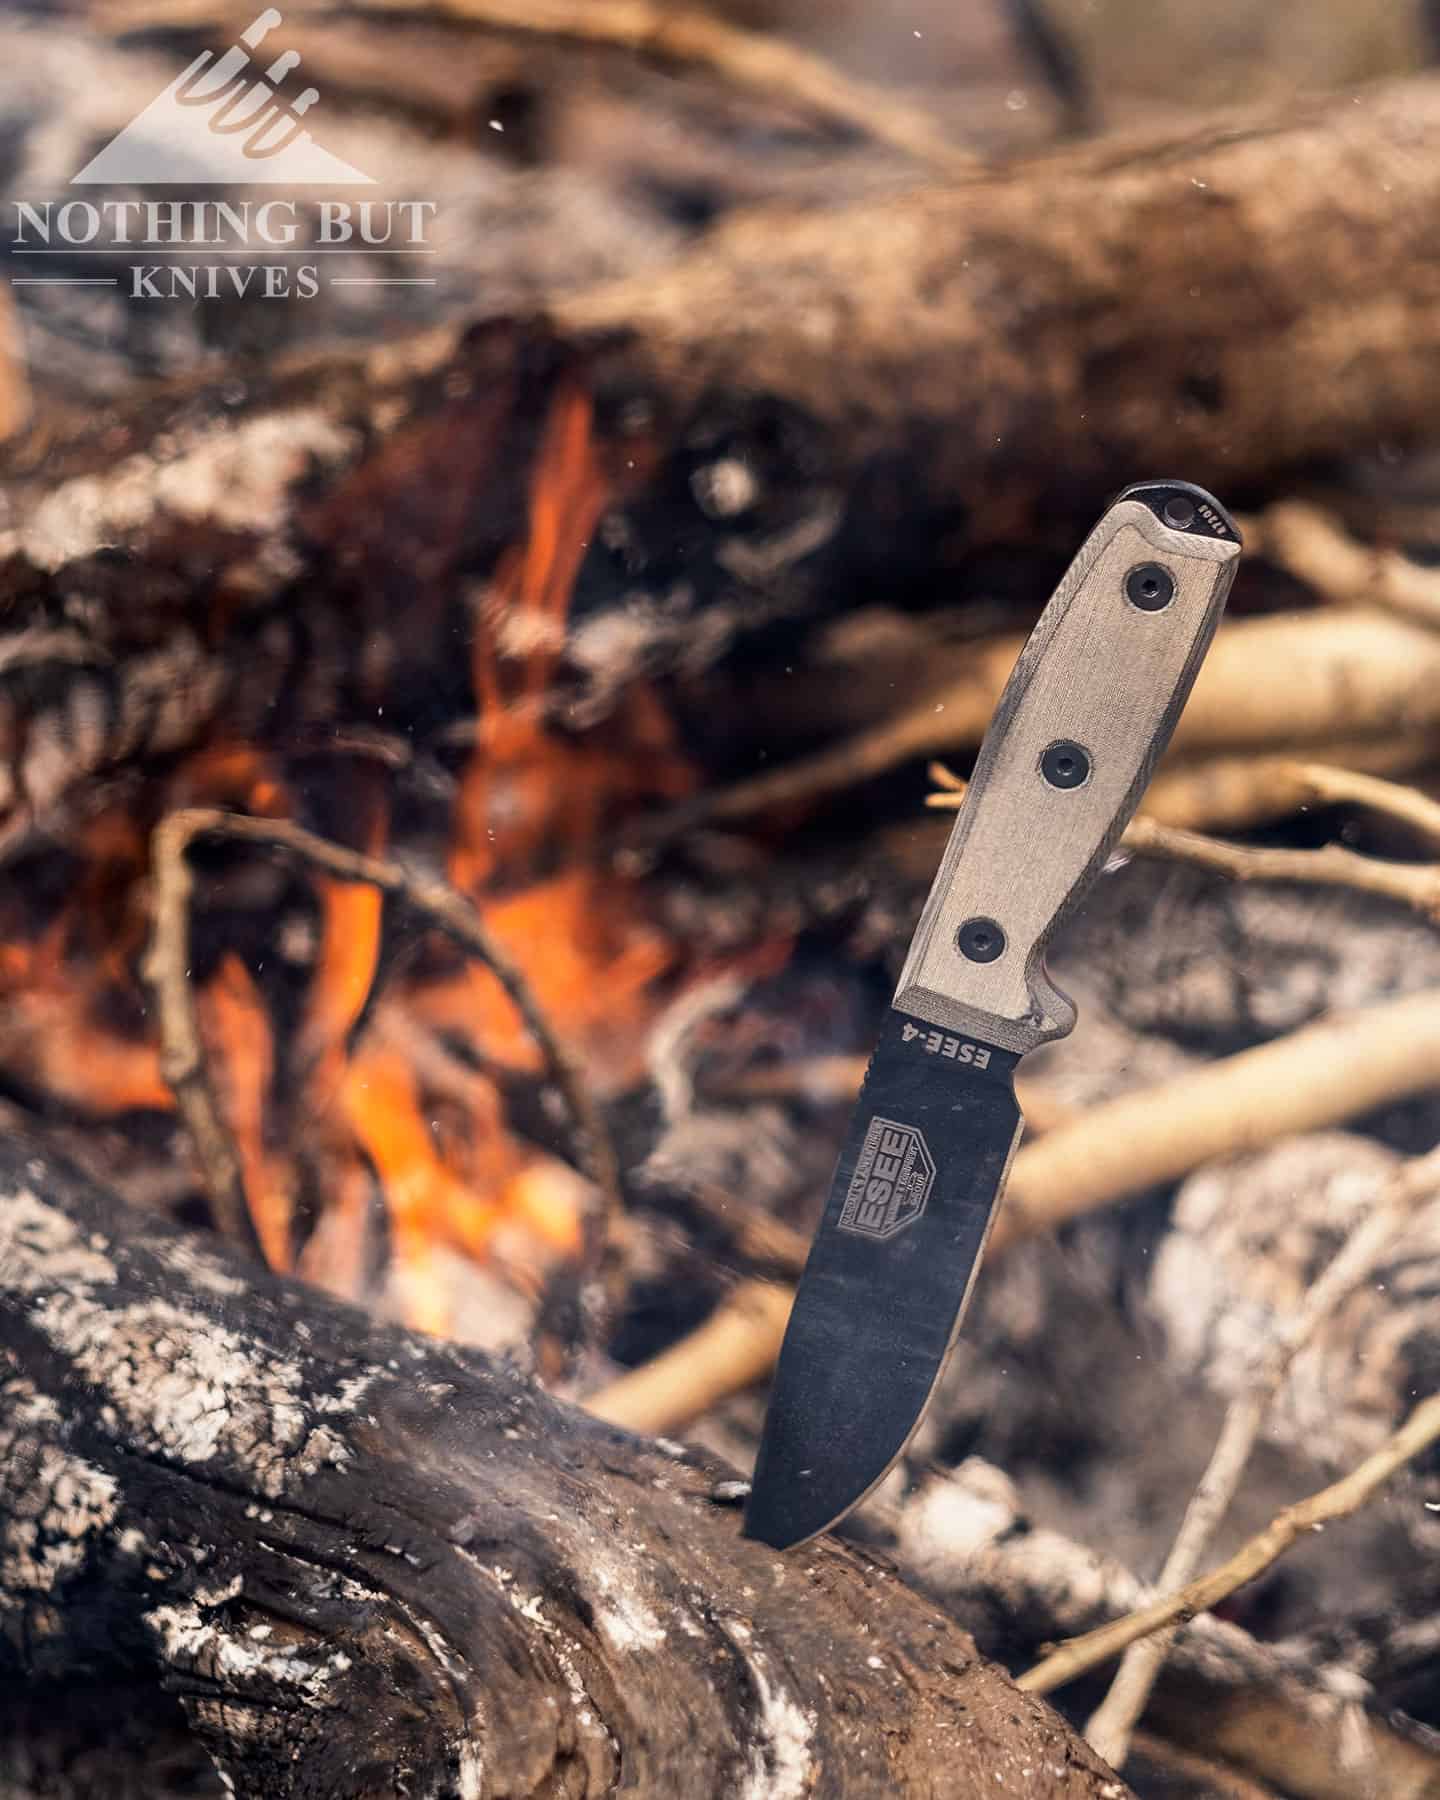 https://www.nothingbutknives.com/wp-content/uploads/2022/07/Camping-With-The-Esee-4.jpg